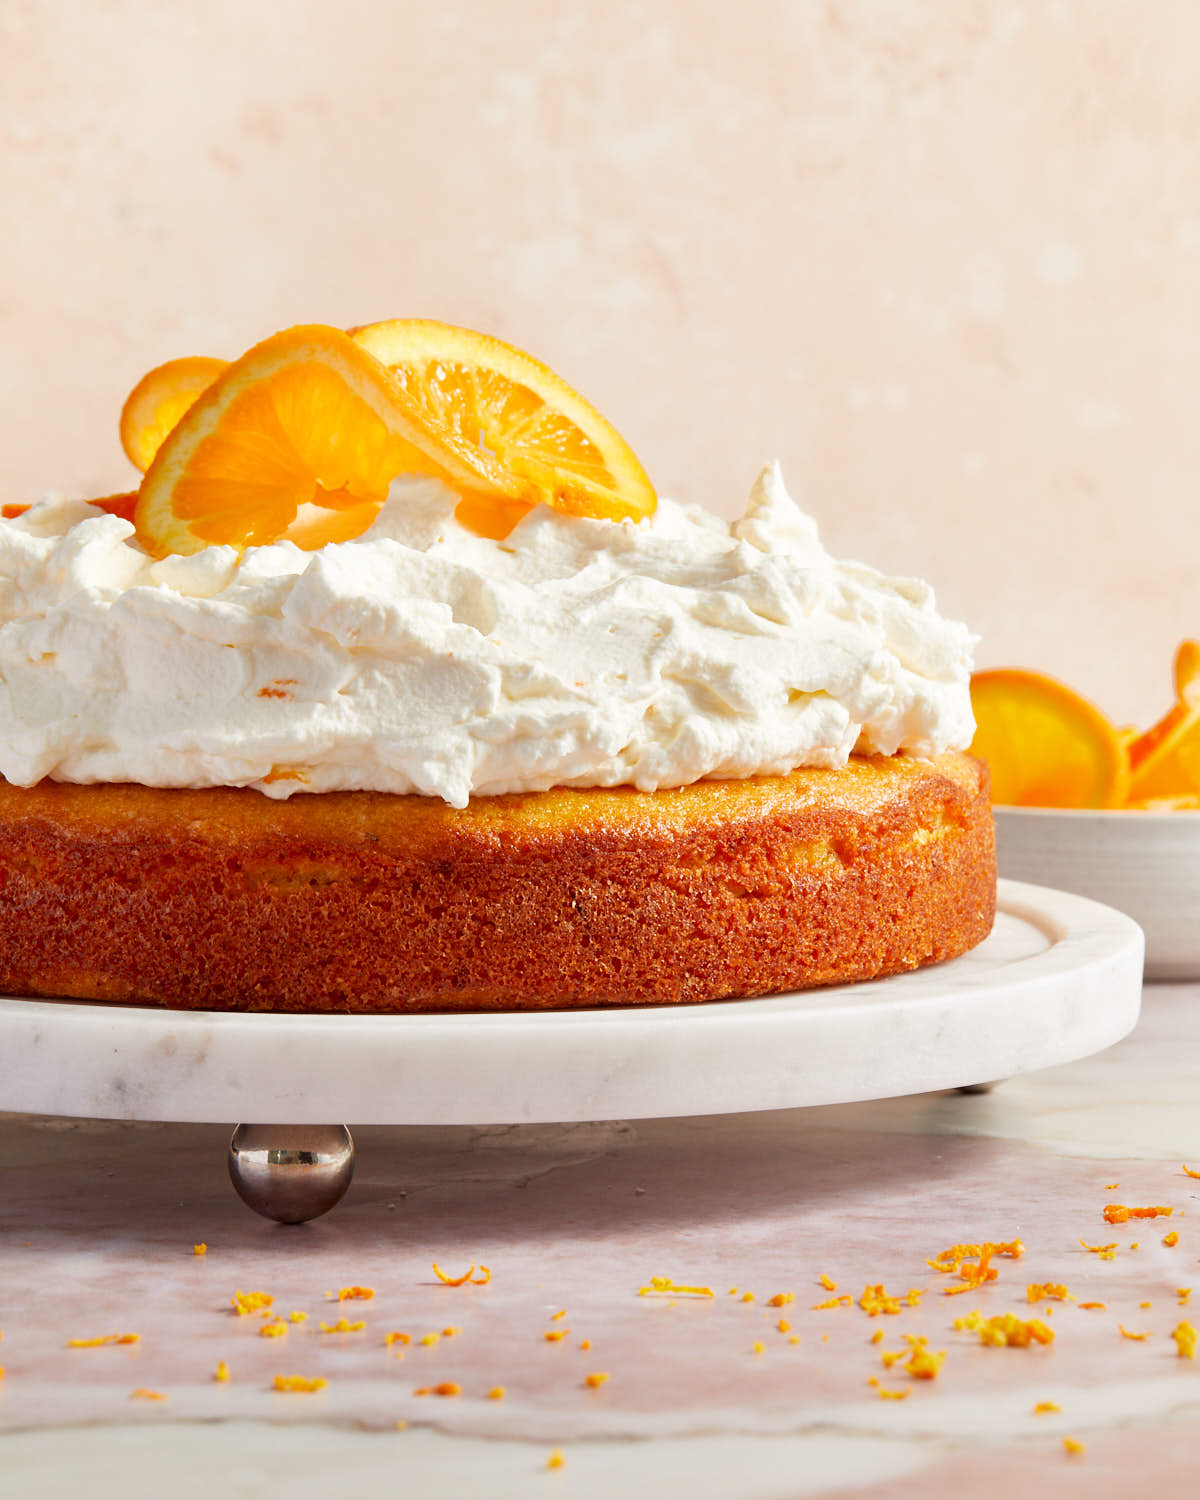 Side view of orange cake topped with whipped cream and orange slices on a white cake plate.